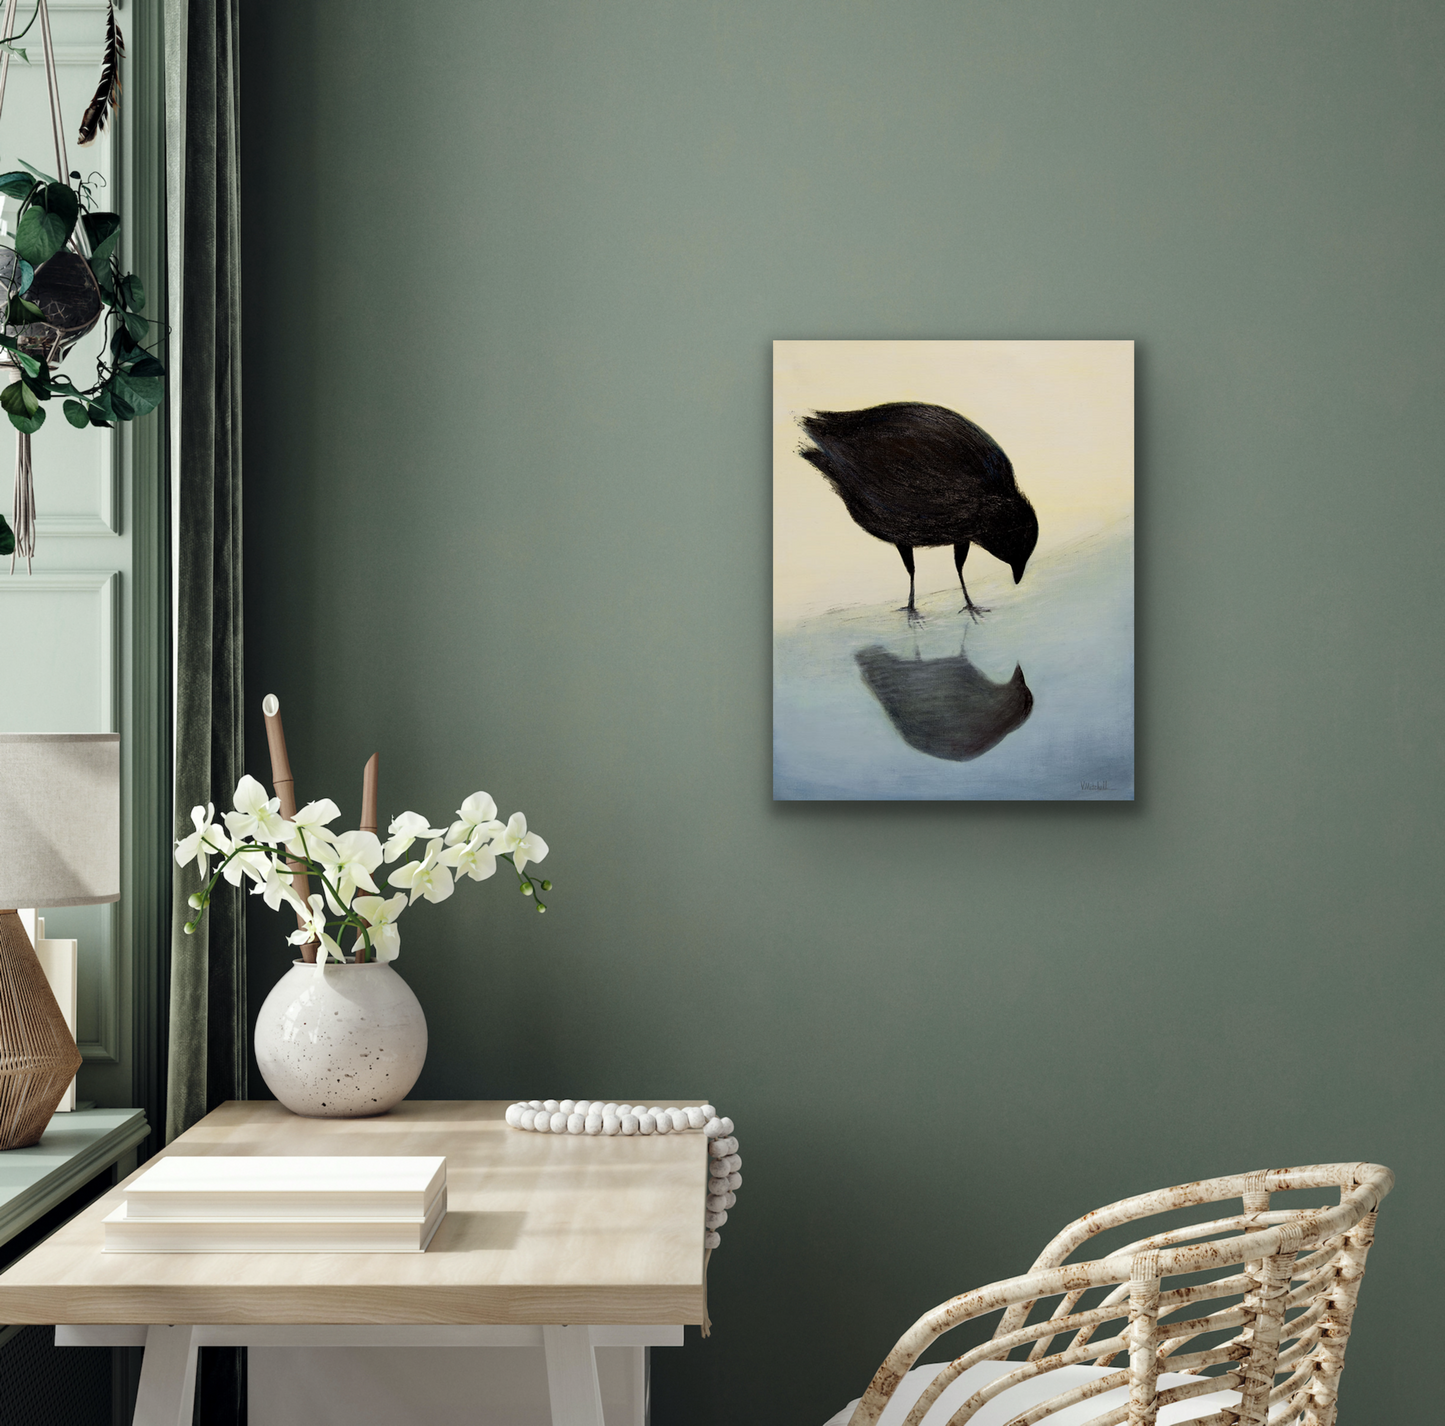 Hello wall art piece comes in four different sizes.  It is giclee canvas print that we recommend you frame as a gallery wrap so can easily hang on your wall.